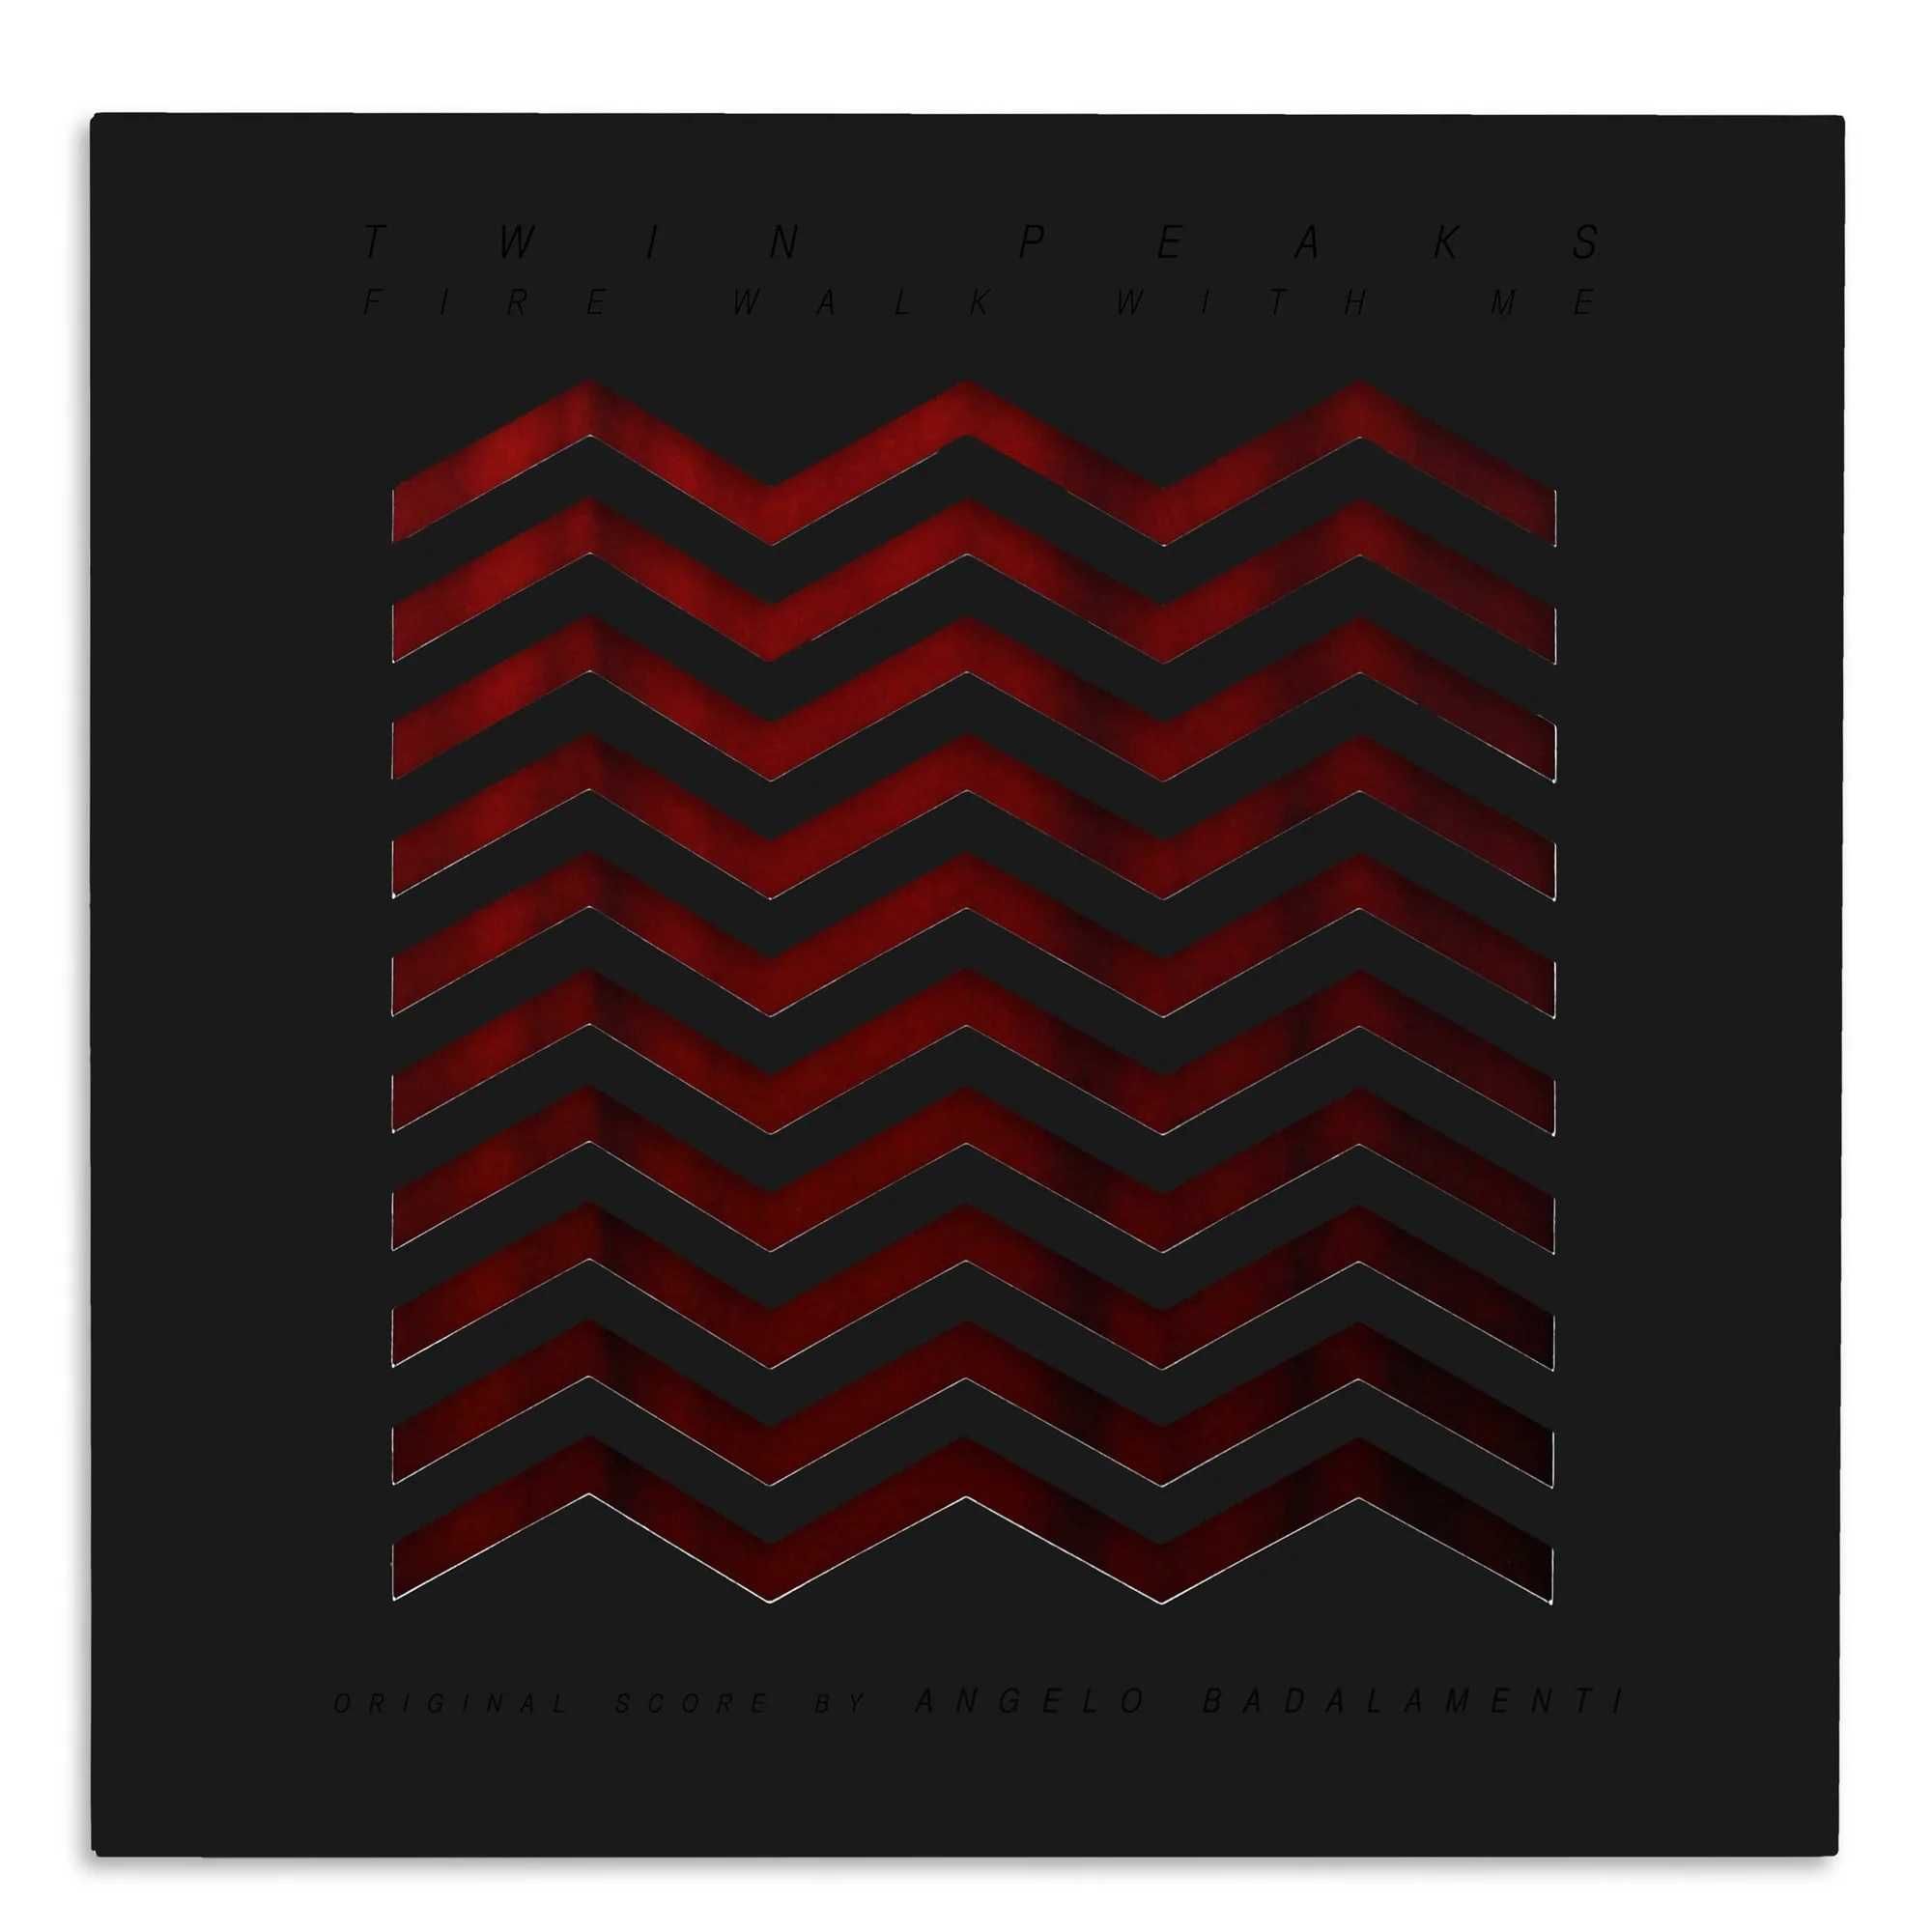 Twin Peaks: Fire Walk With Me –  Soundtrack Winyl 2xLP Limited Edition